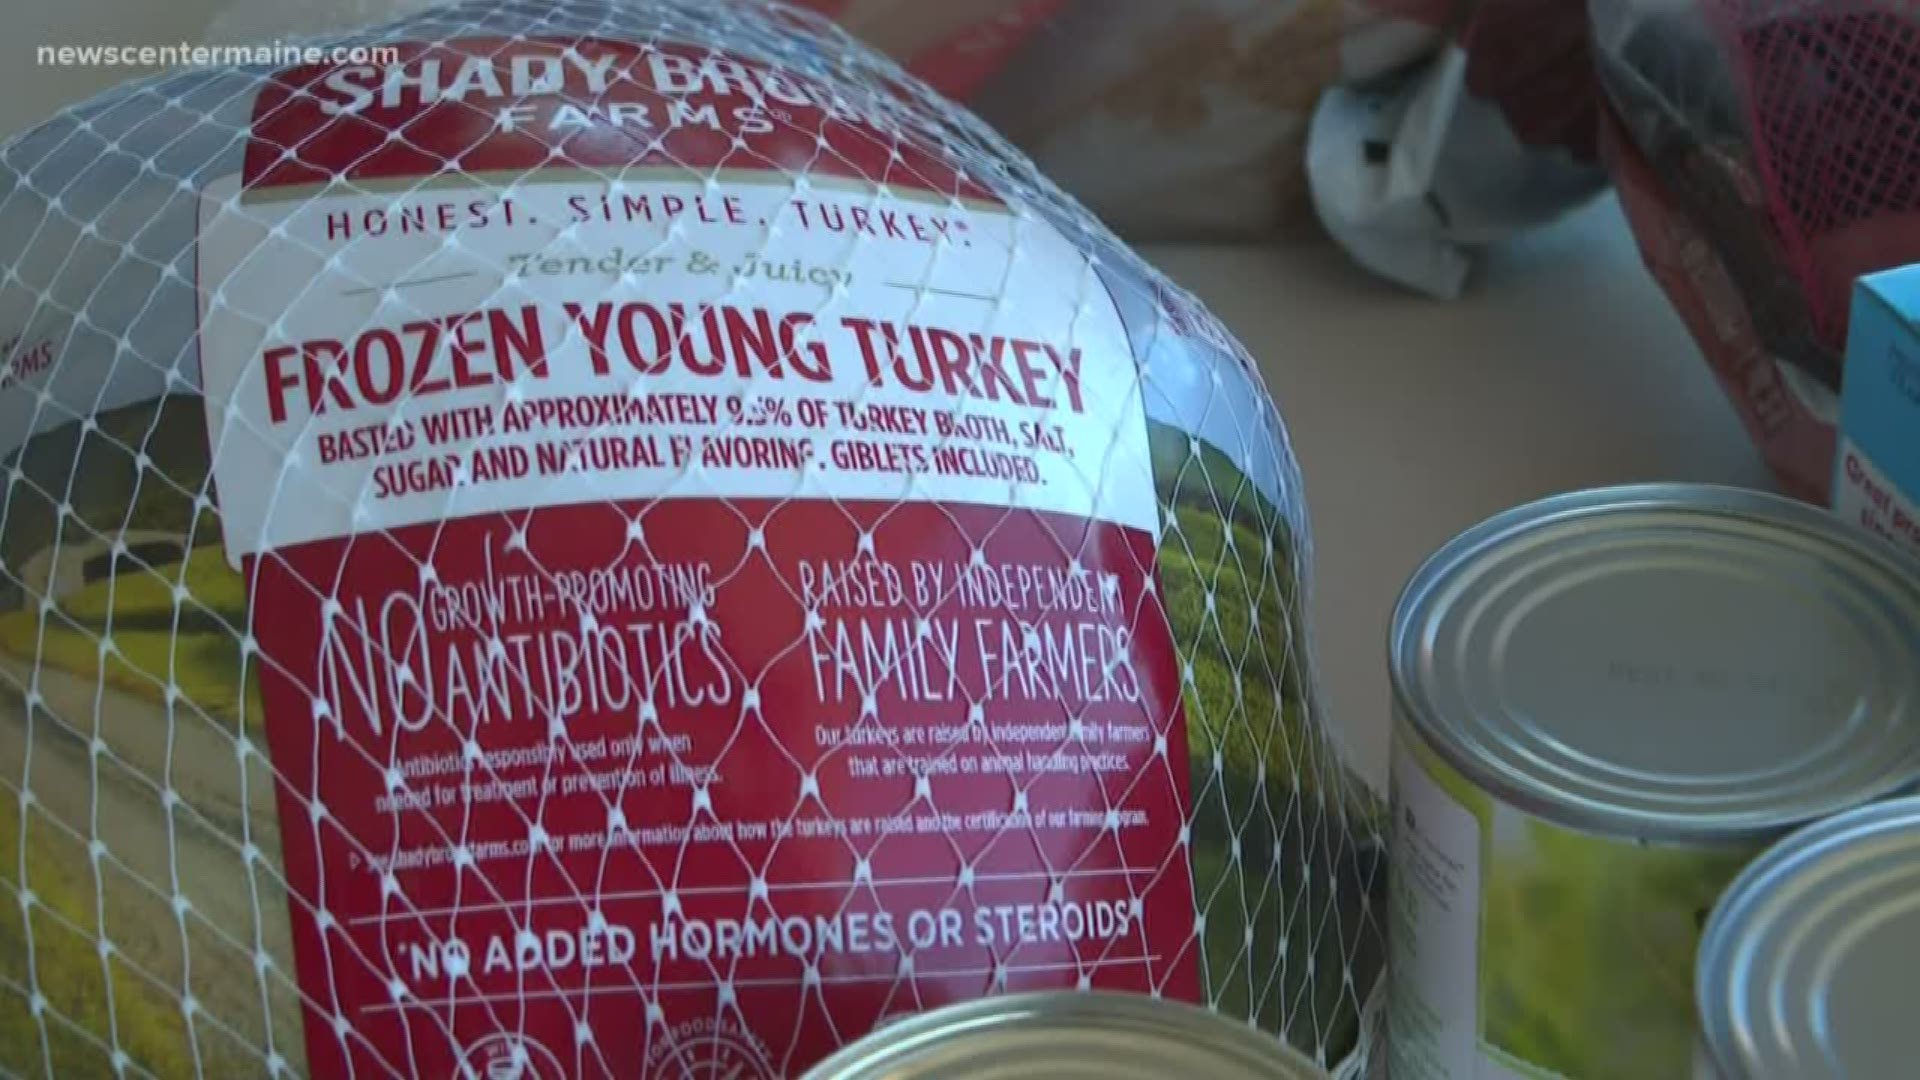 The Westbrook Police Department and the city's food pantry are collecting turkeys and thanksgiving meal sides.